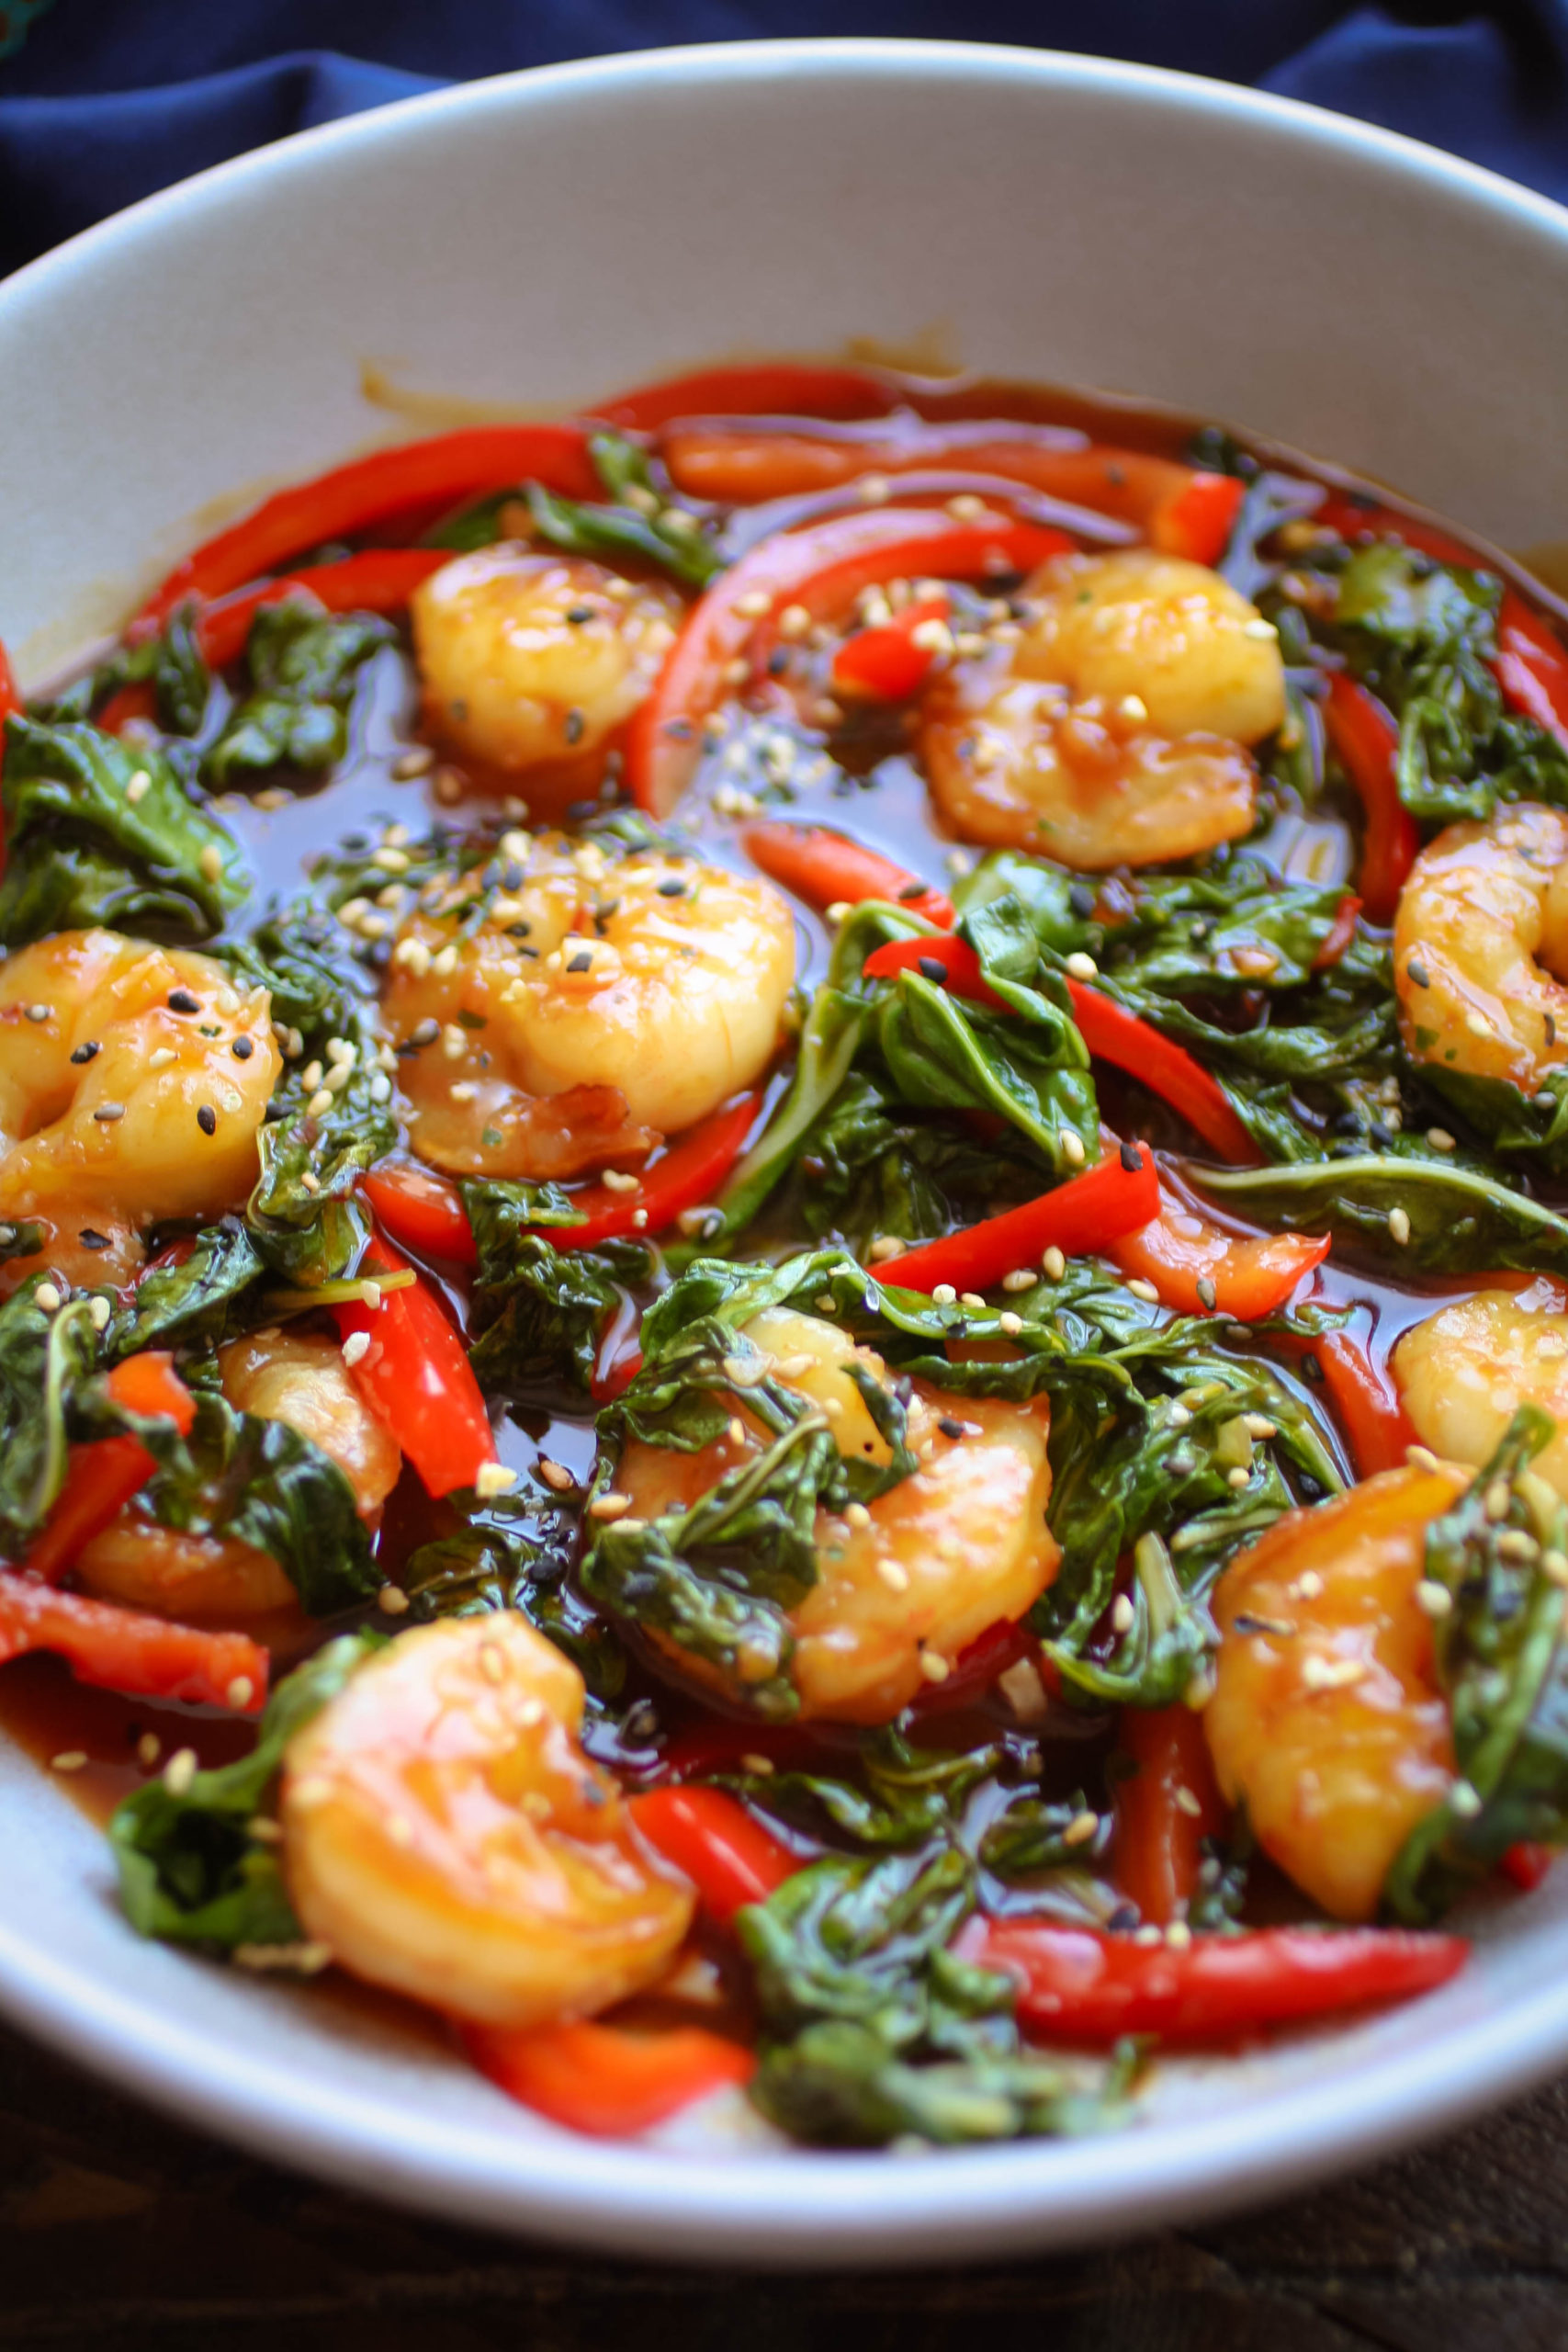 Spicy Garlic Shrimp and Swiss Chard Stir Fry is an easy-to-make, tasty dish!